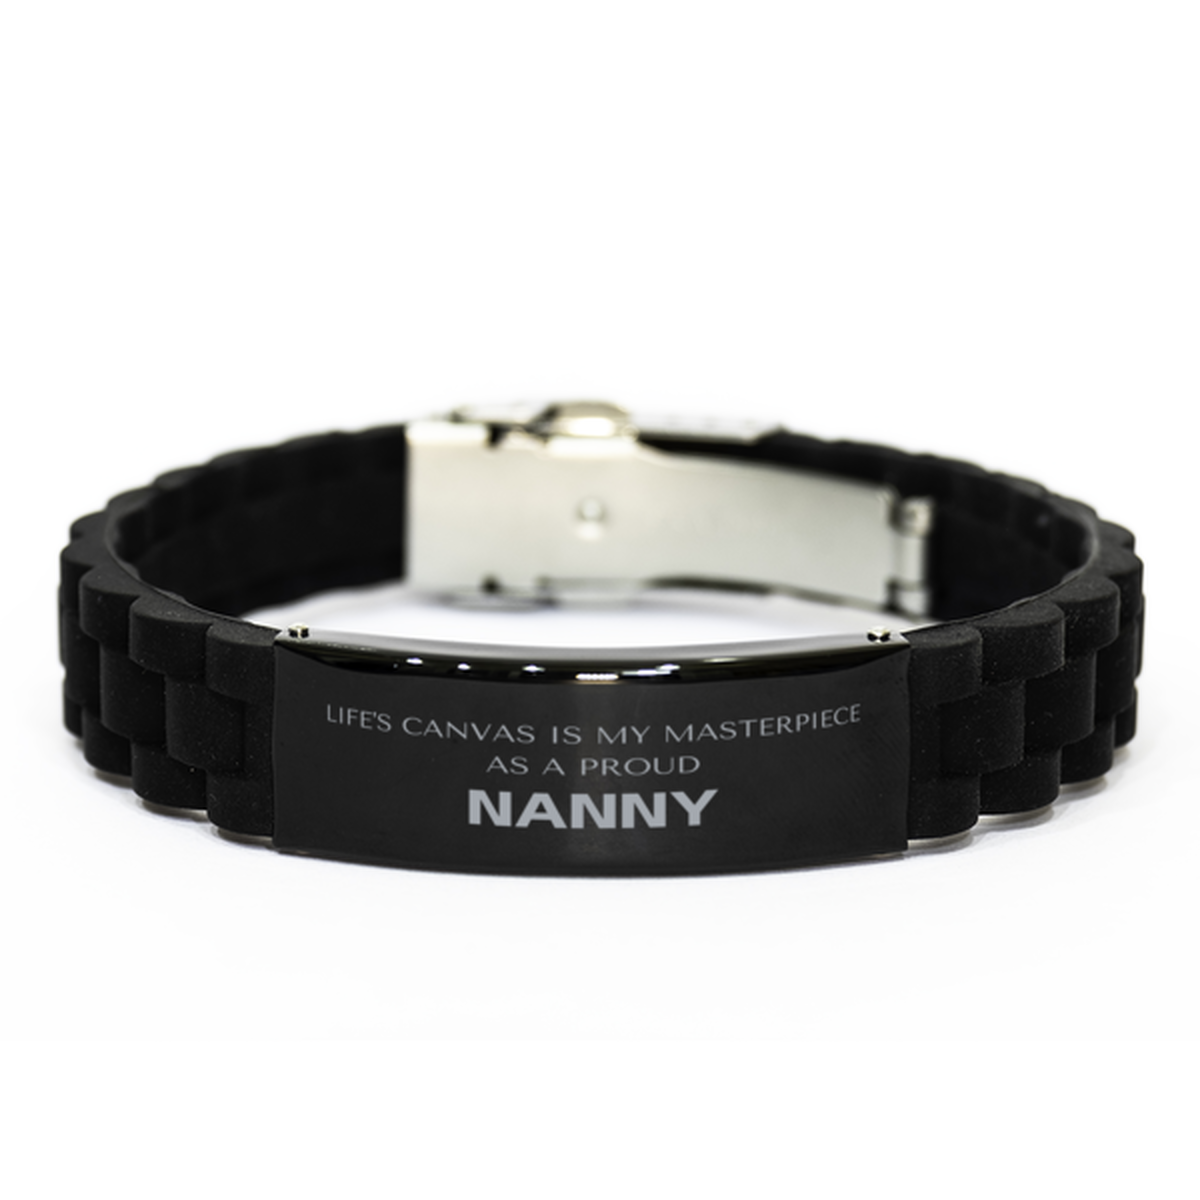 Proud Nanny Gifts, Life's canvas is my masterpiece, Epic Birthday Christmas Unique Black Glidelock Clasp Bracelet For Nanny, Coworkers, Men, Women, Friends